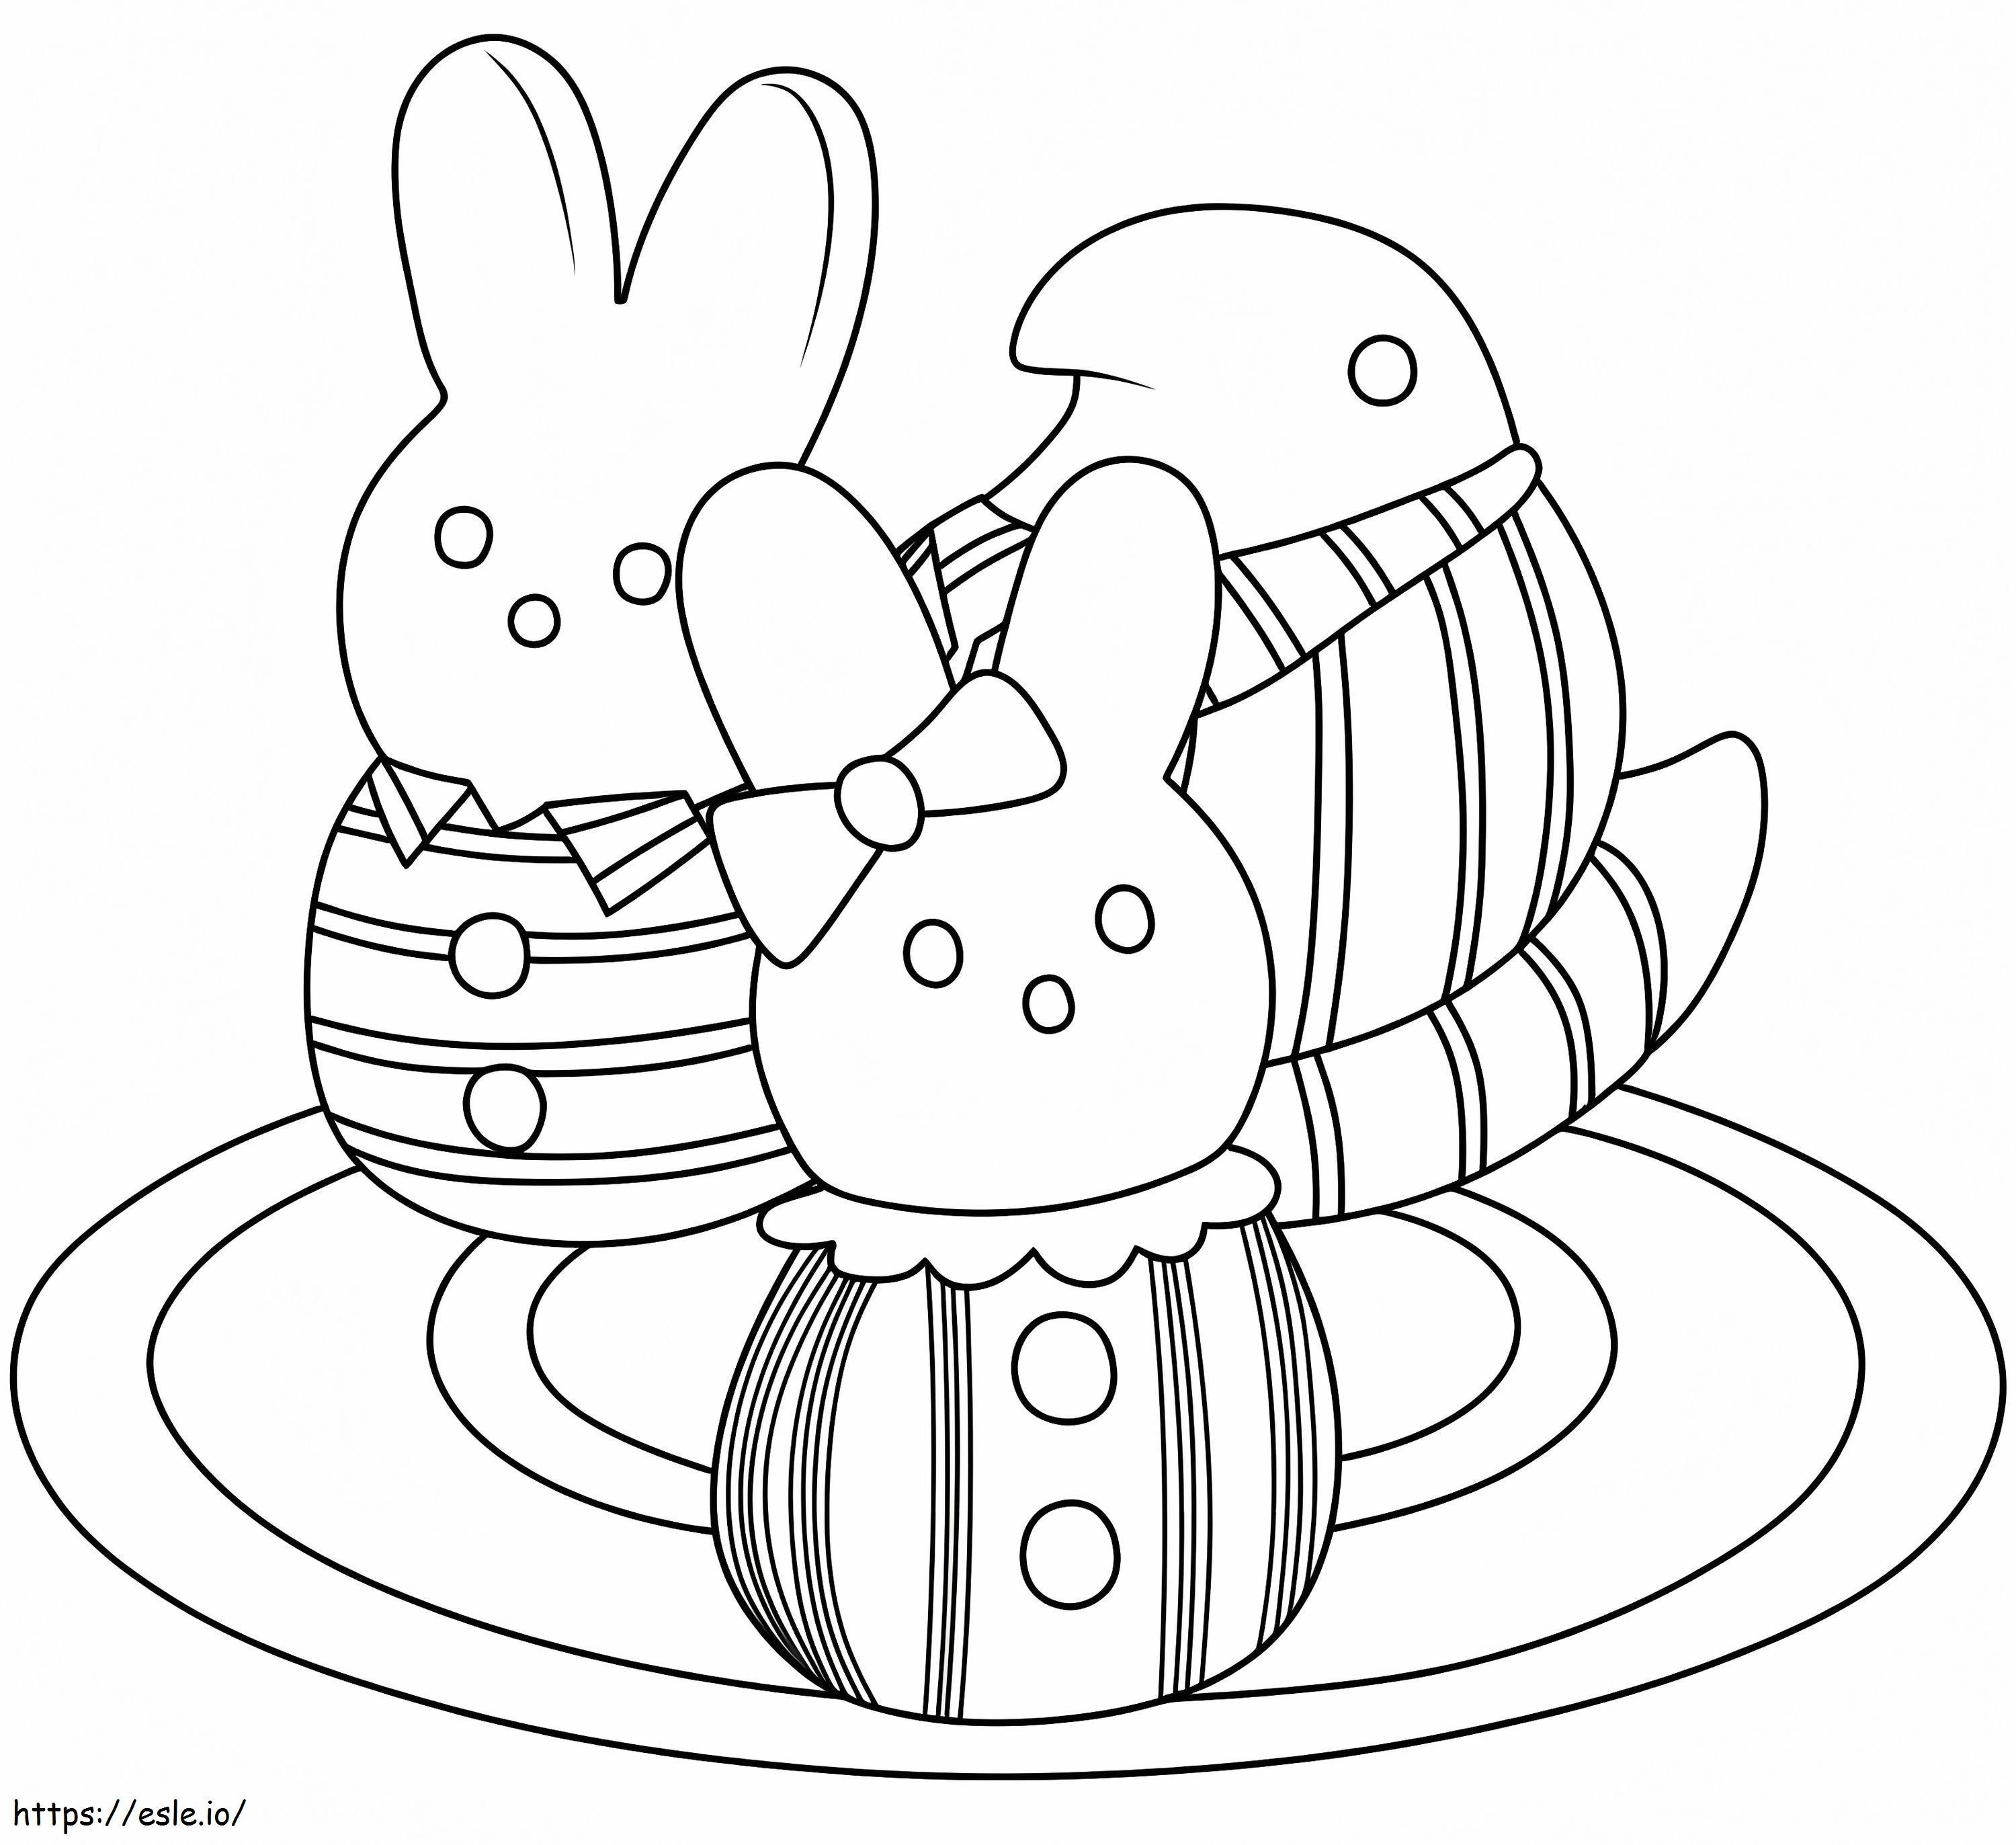 Marshmallow Peeps 9 coloring page